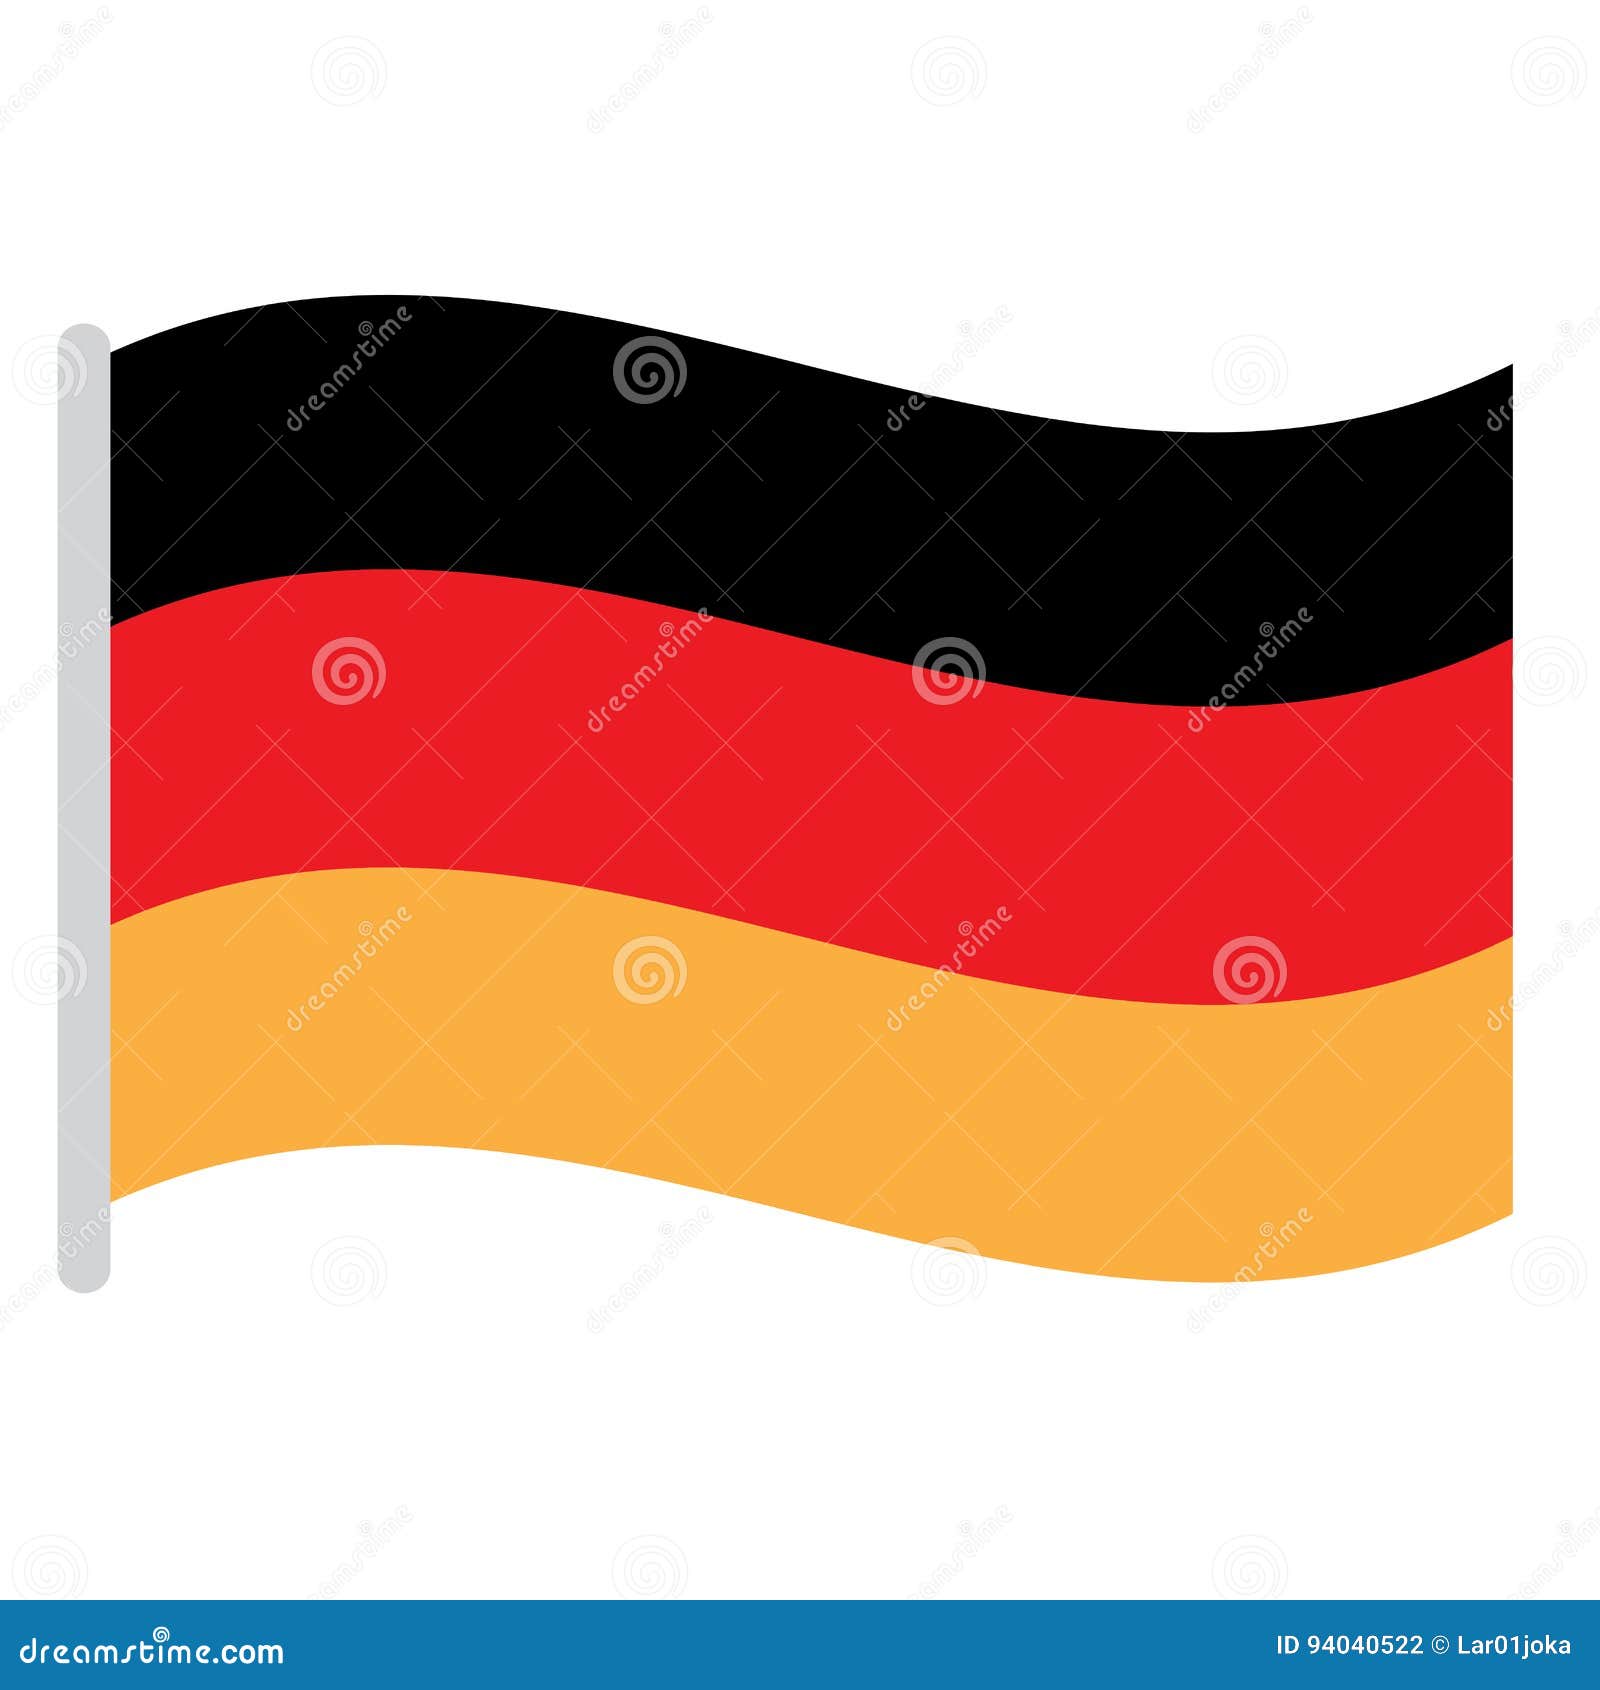 Isolated German flag stock vector. Illustration of flag - 94040522